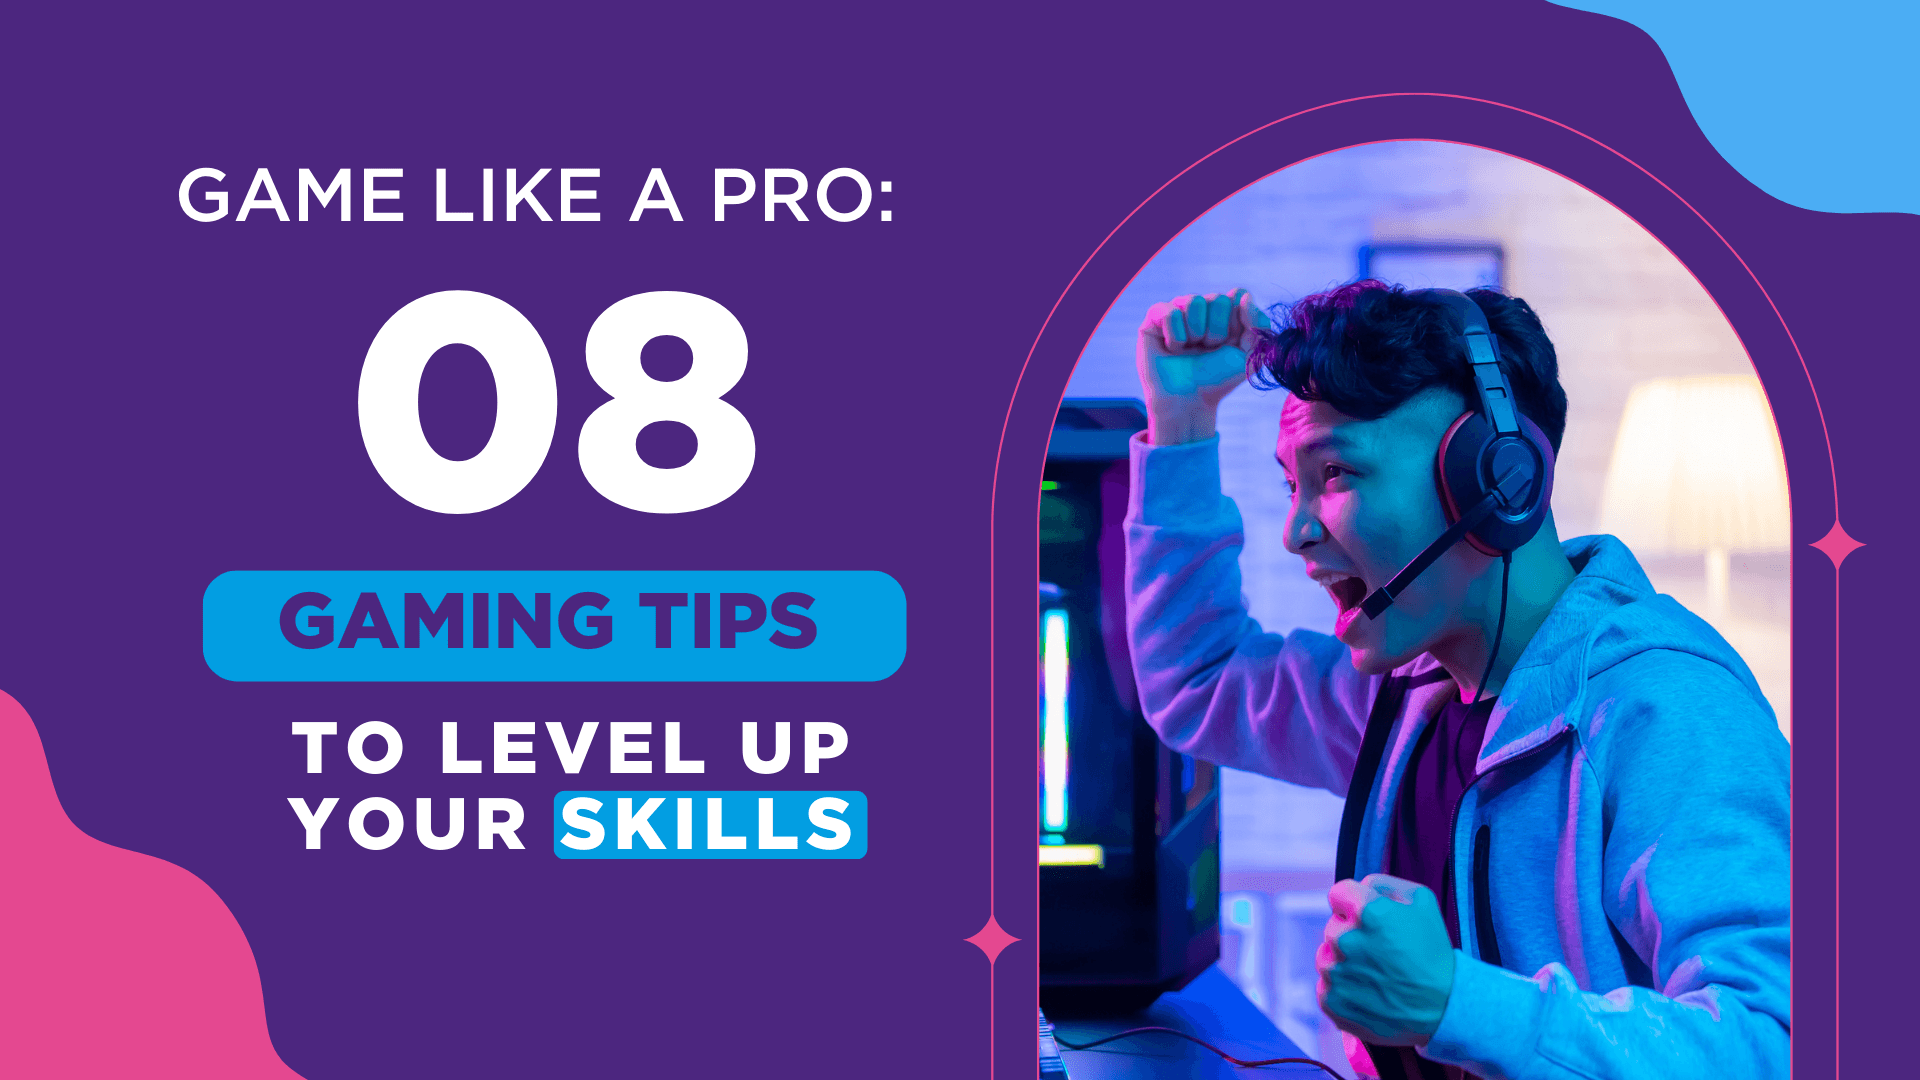 Game like a pro: 8 gaming tips to level up your skills - Gamestate